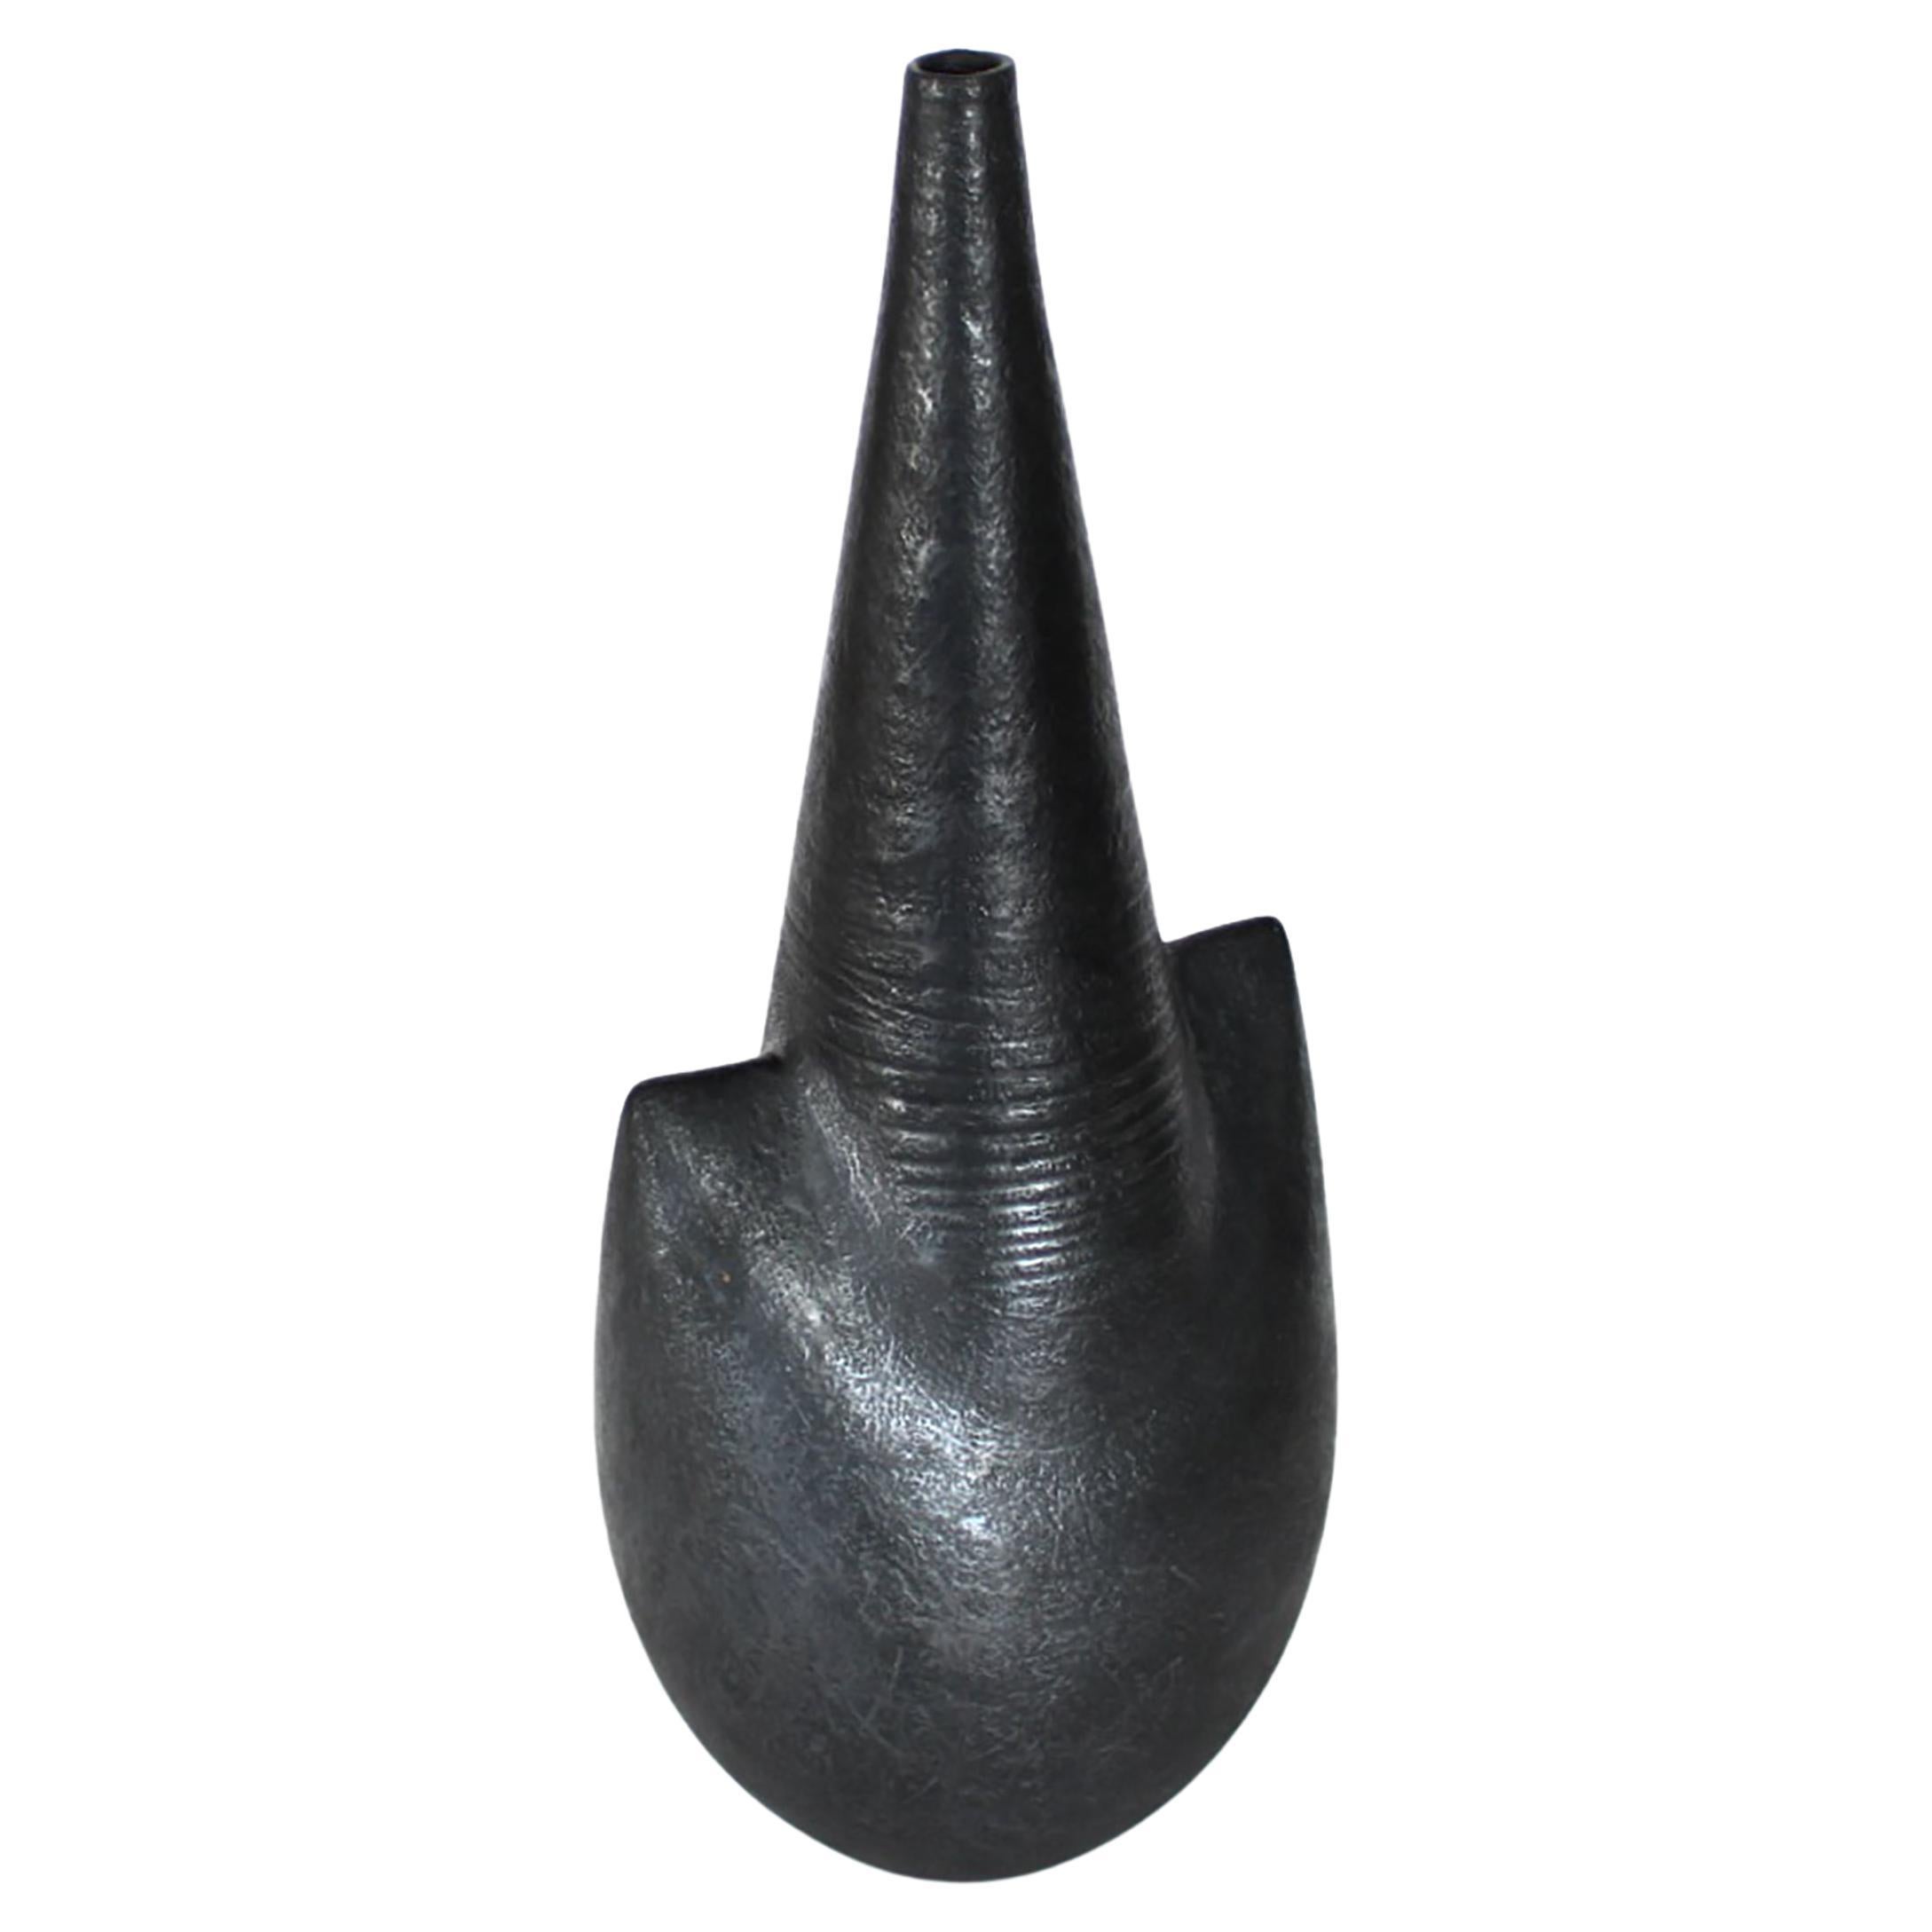 A tall ceramic vase by French artist Andre Bloch. Bloch uses a heavily grogged clay and deep black glaze to create his unique forms. Circa 2010
